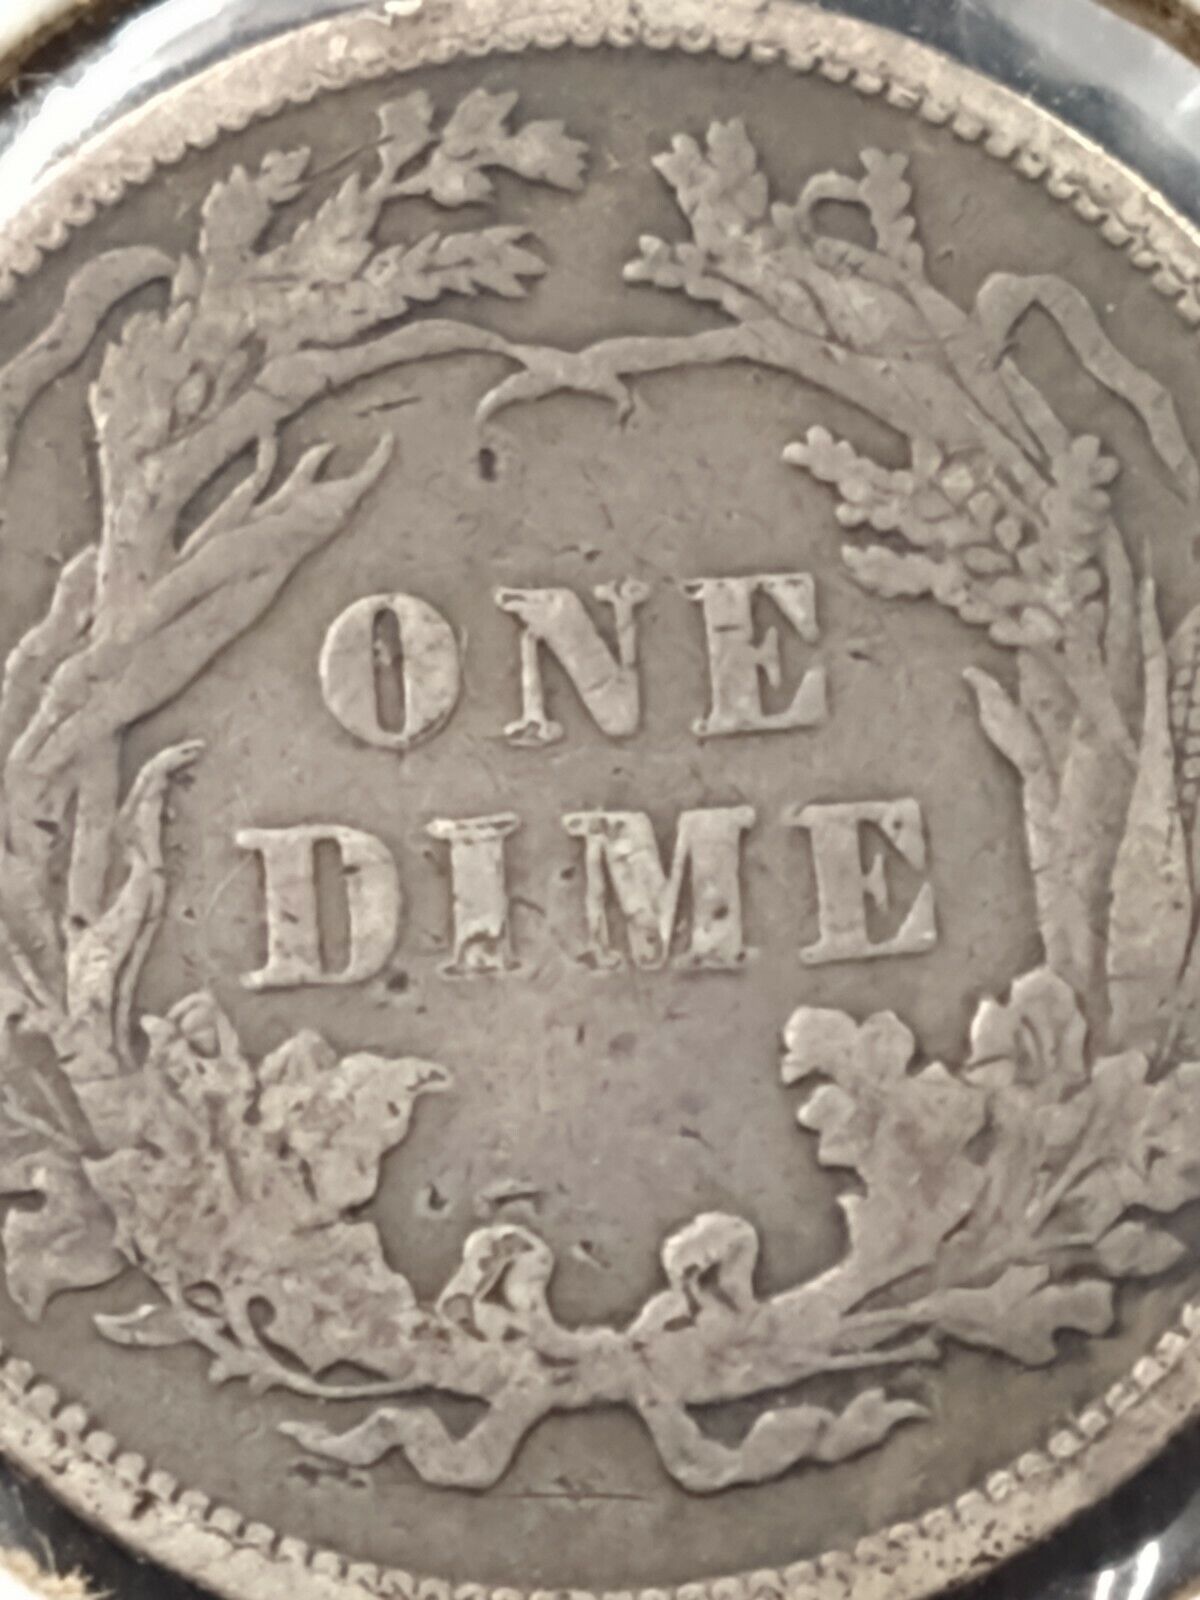 1887 P SEATED LIBERTY SILVER DIME COIN VG / Fine REV Struck by Rusty Die